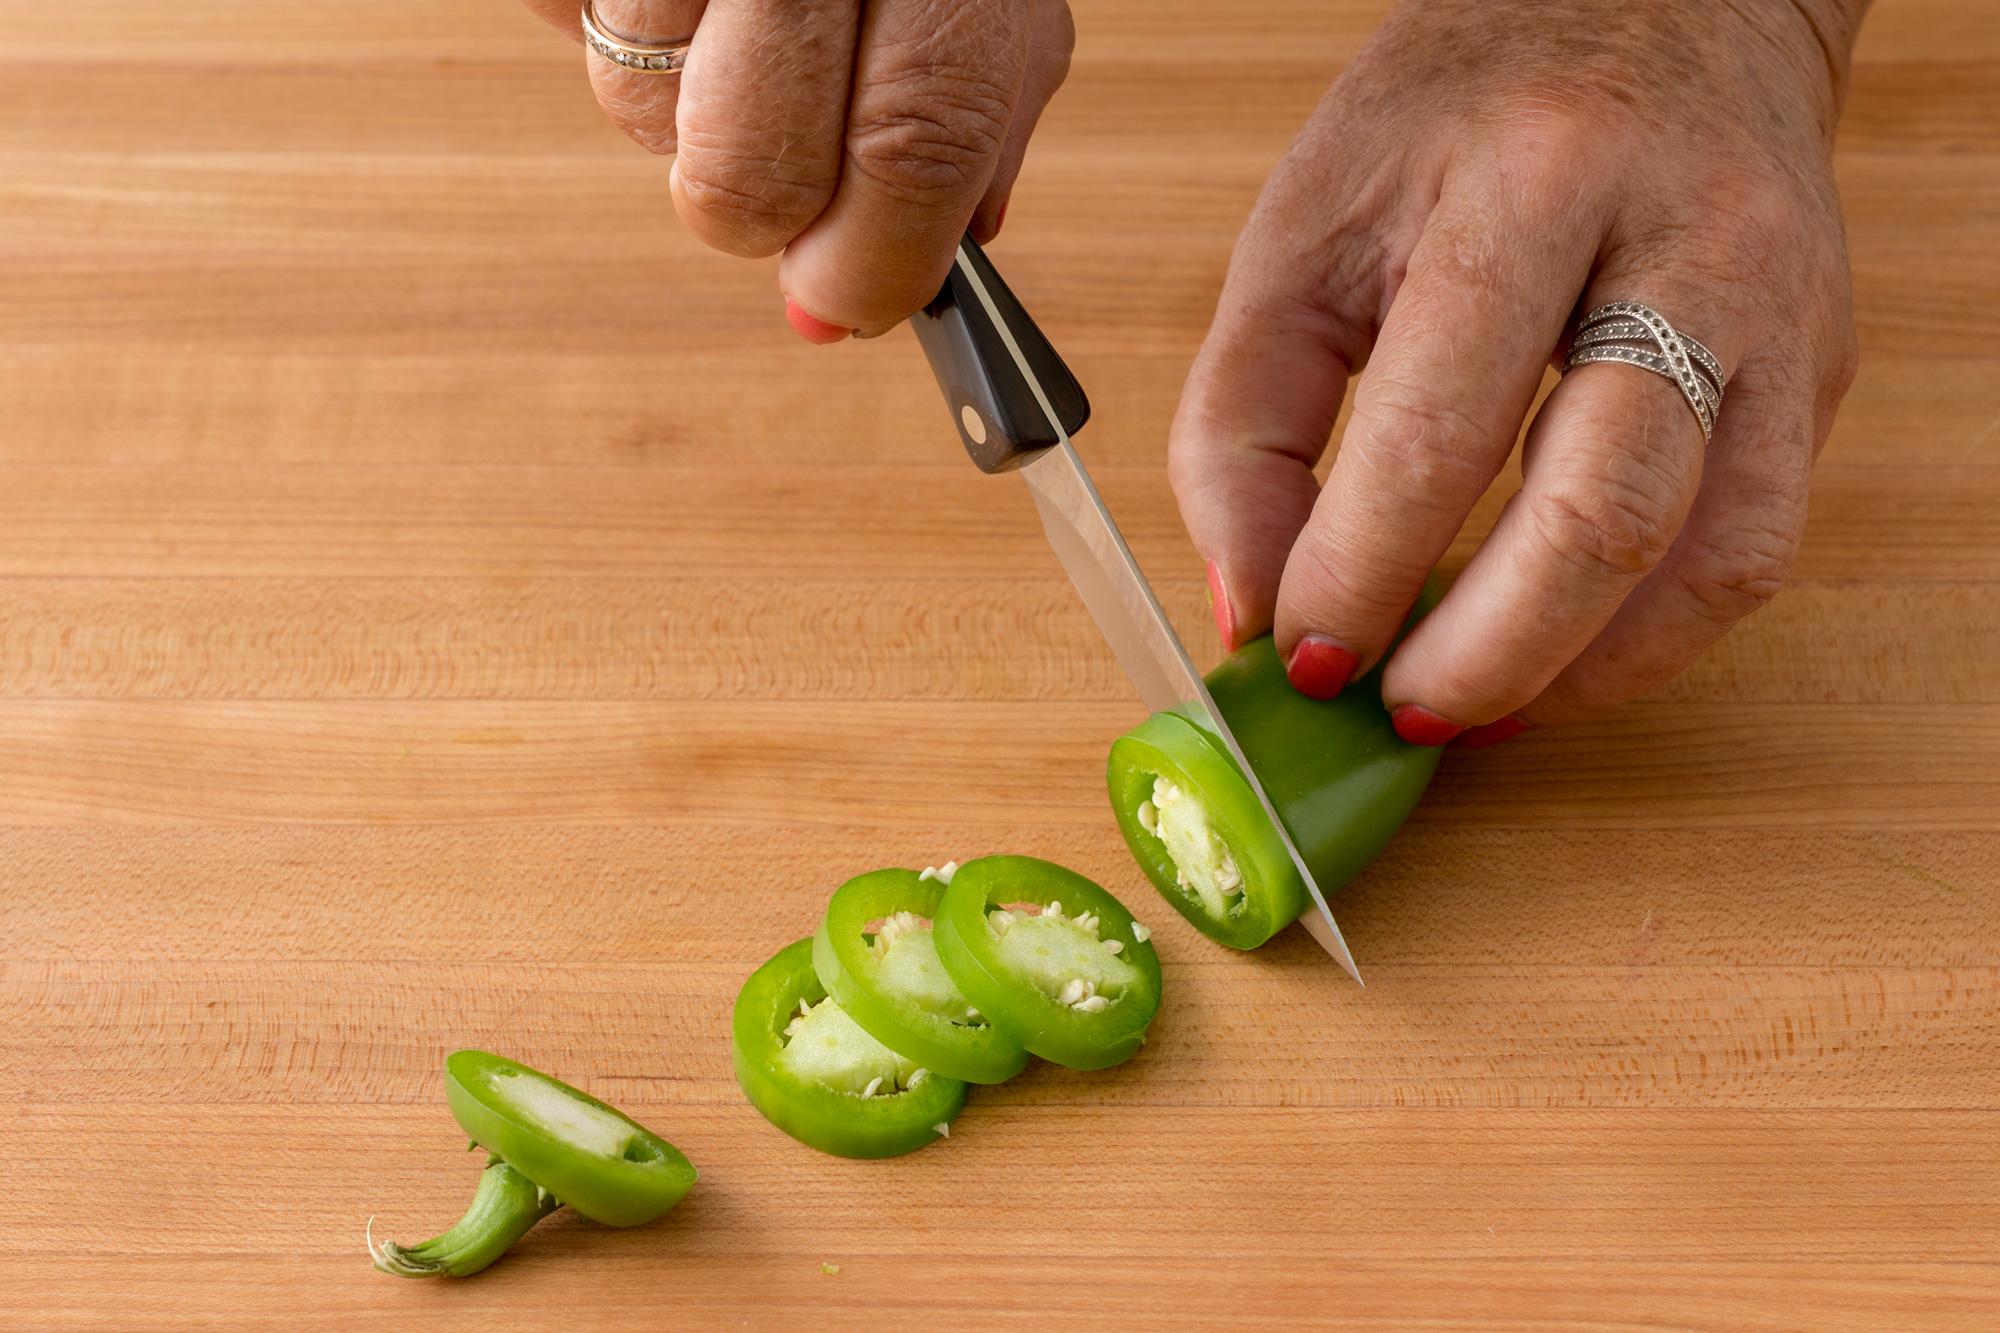 Slicing the jalapenos with a 3 Inch Gourmet Paring Knife.